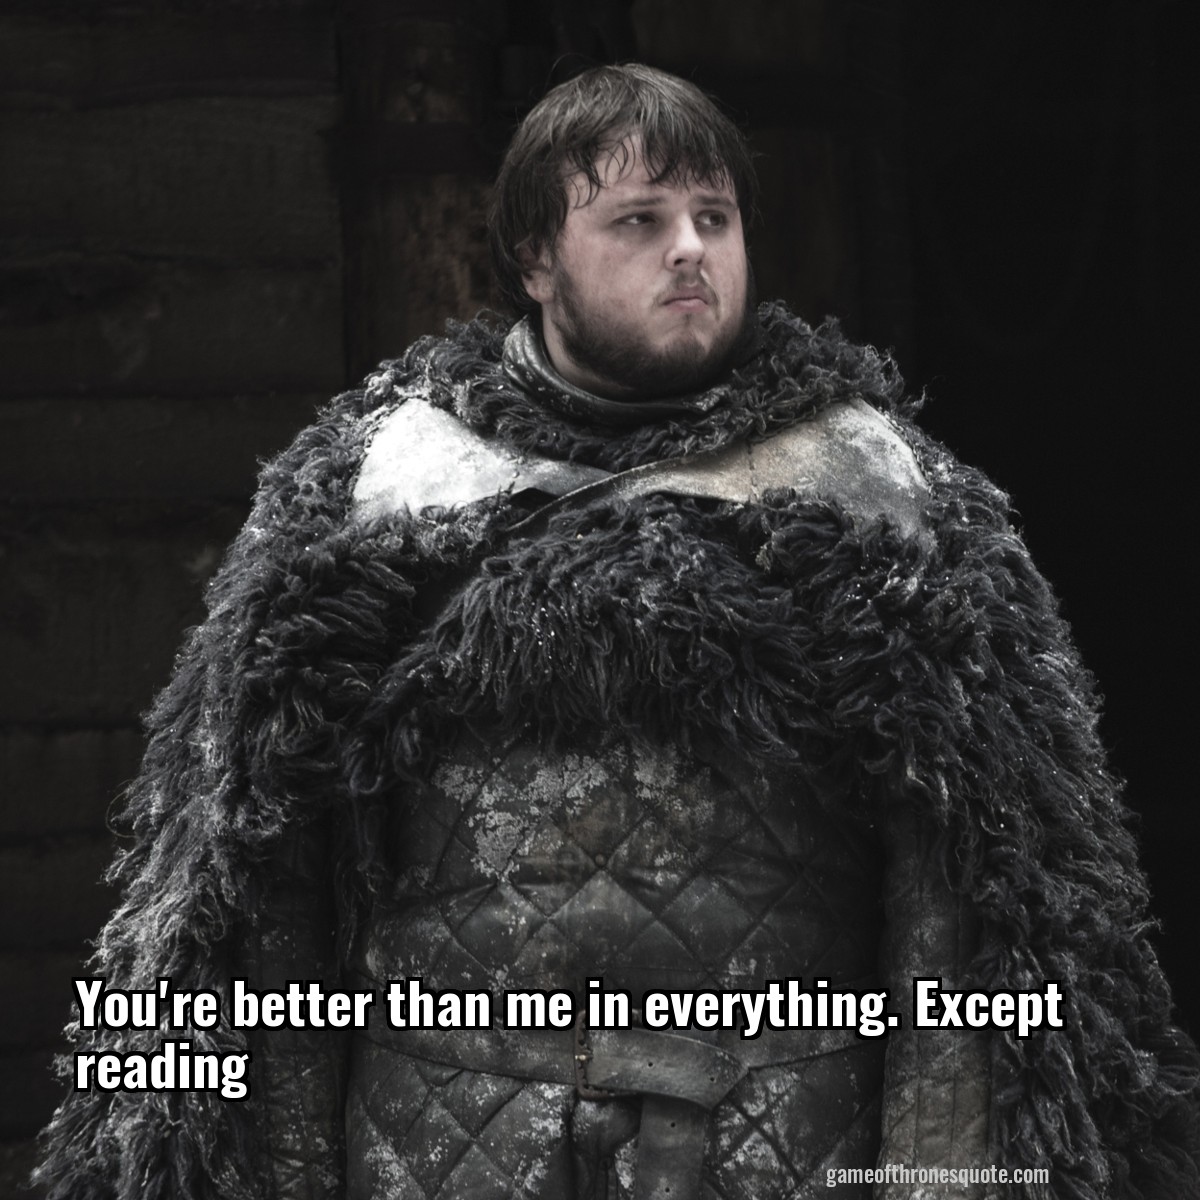 You're better than me in everything. Except reading